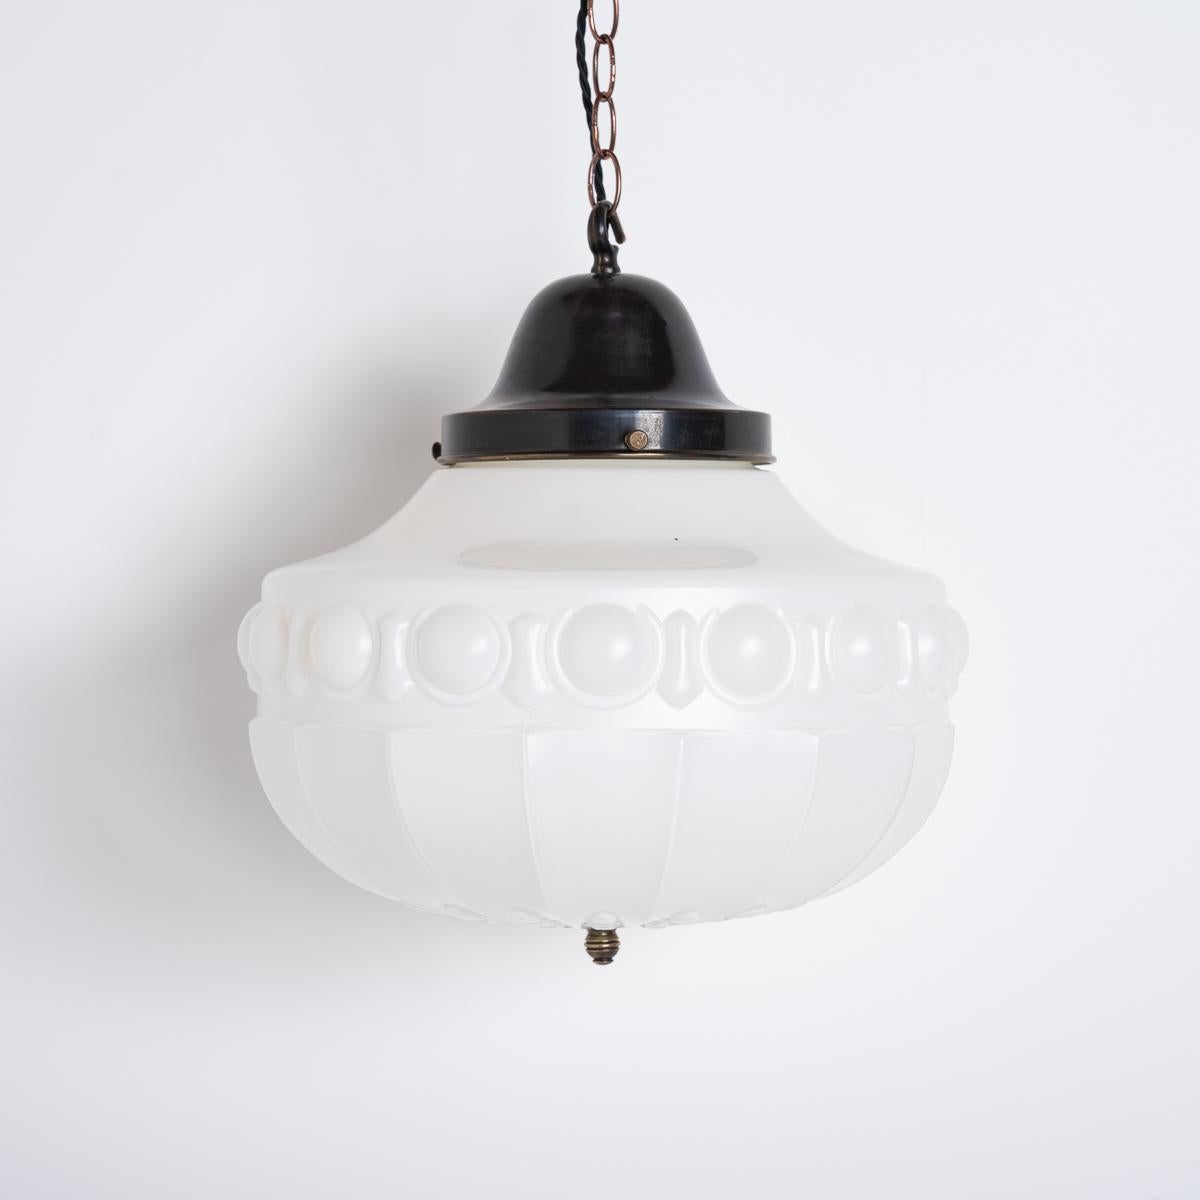 Mid-20th Century Extra Large Vintage Decorative Opaline Pendant Light With Brass Canopy